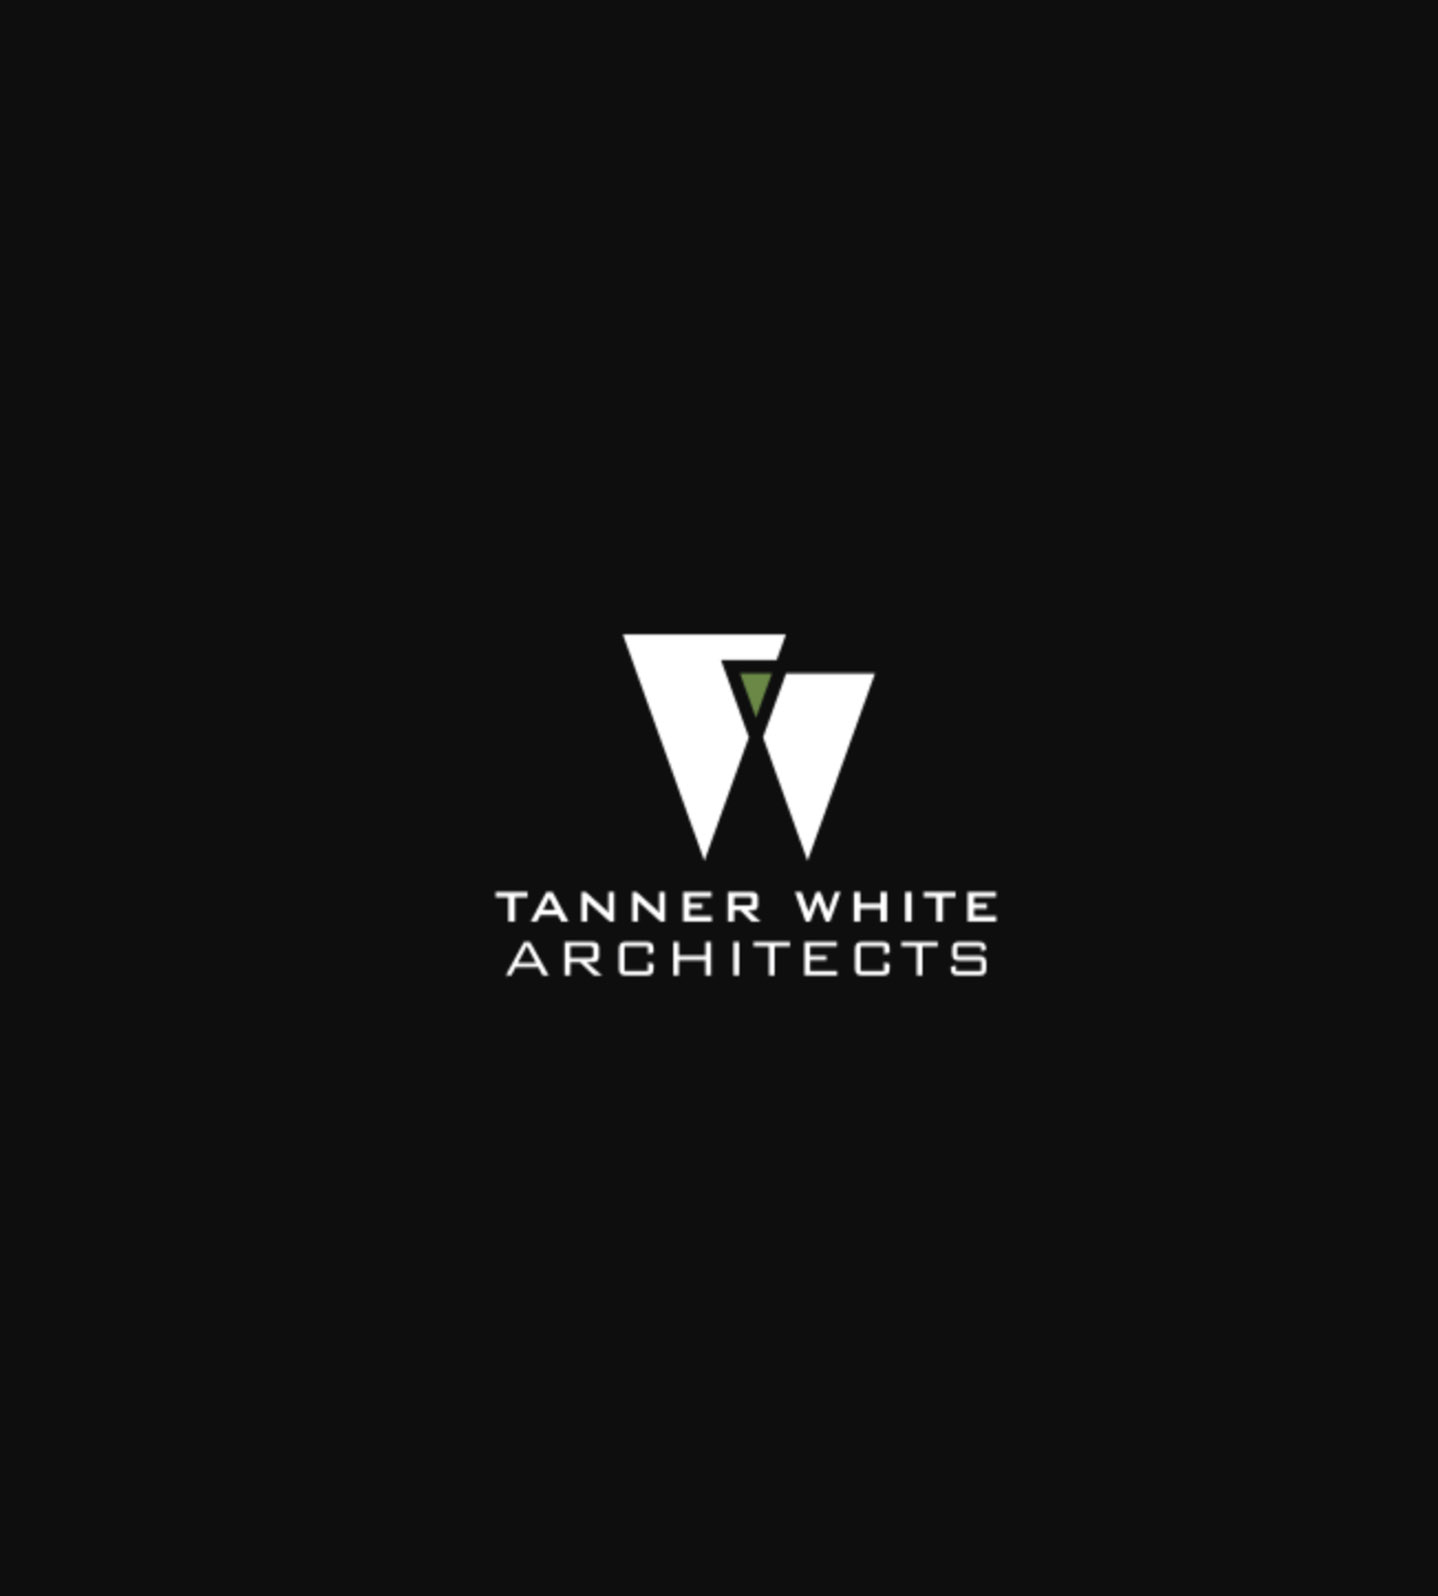 TANNER WHITE ARCHITECTS